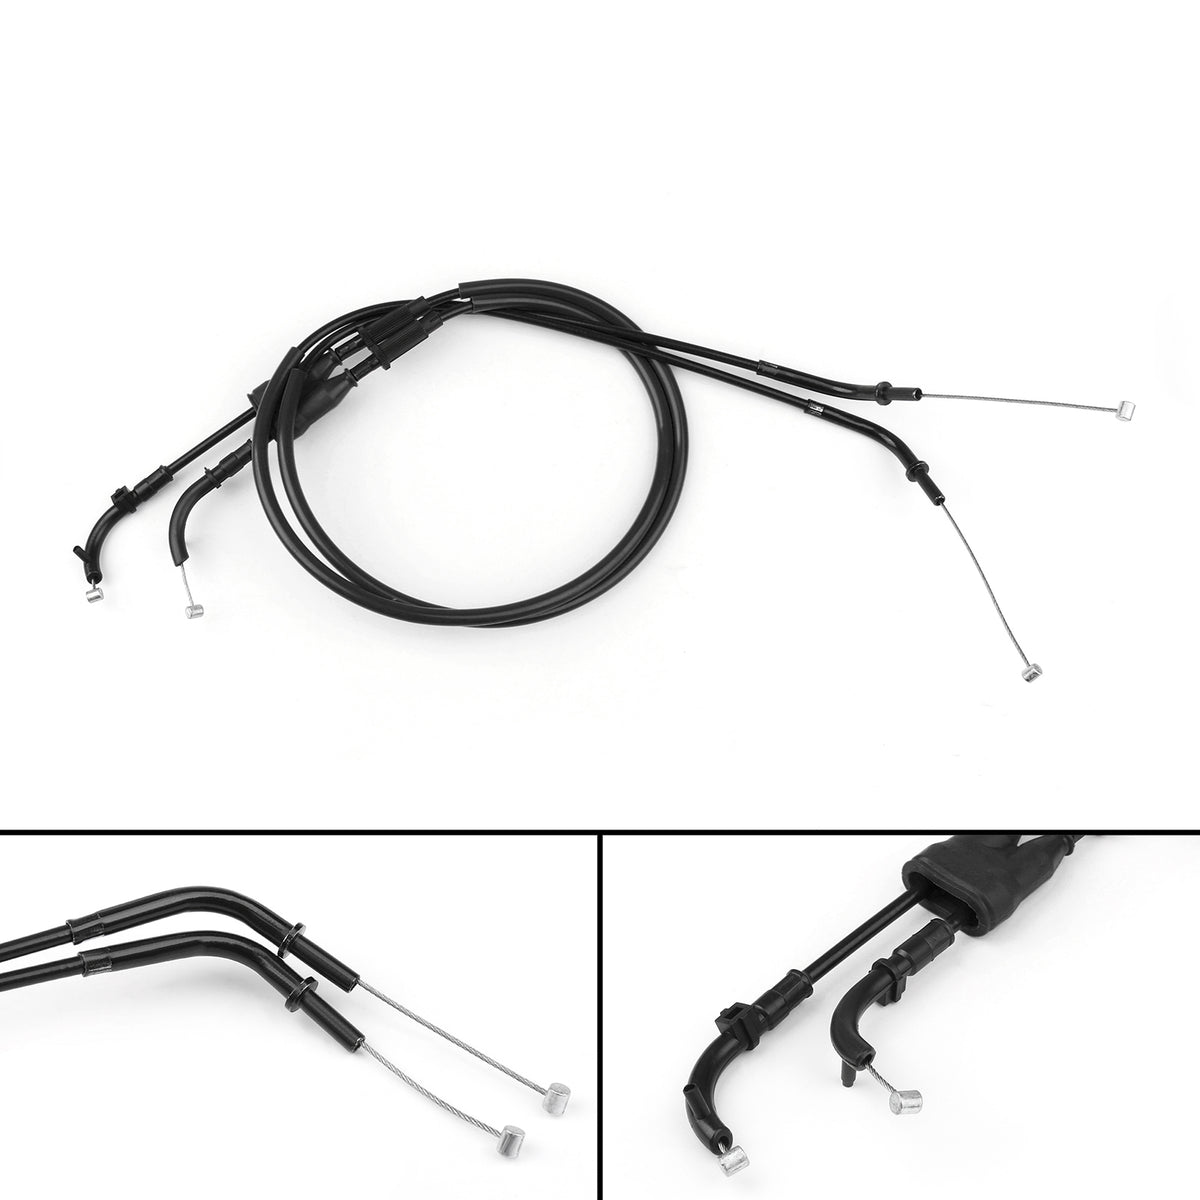 Throttle Cable Push/Pull Wire Line Gas For Kawasaki Z1000 2007-2008 Black